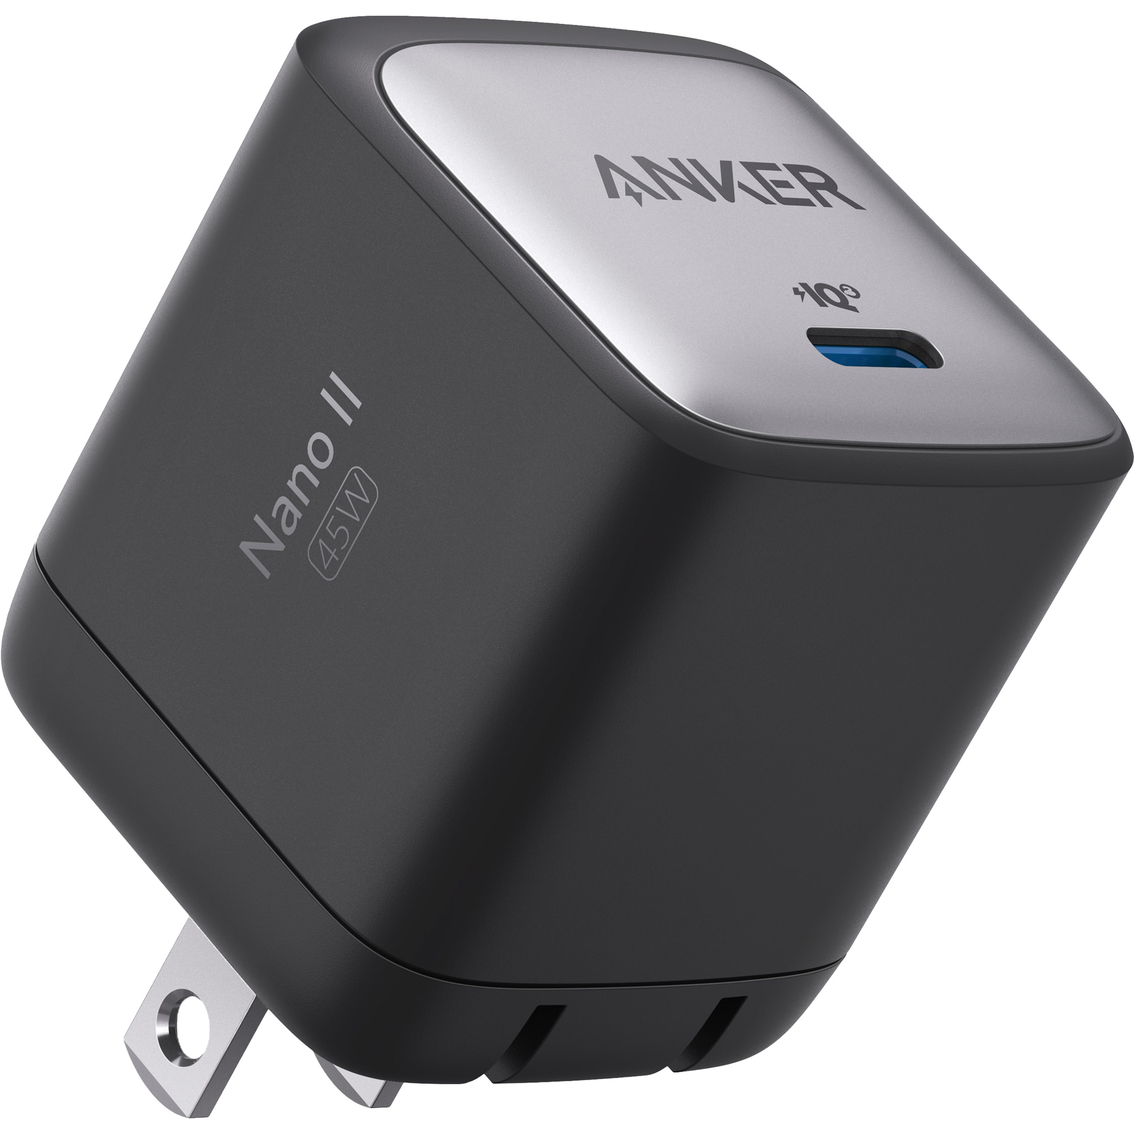 Anker Nano Ii 45w, Cell Phone Batteries & Chargers